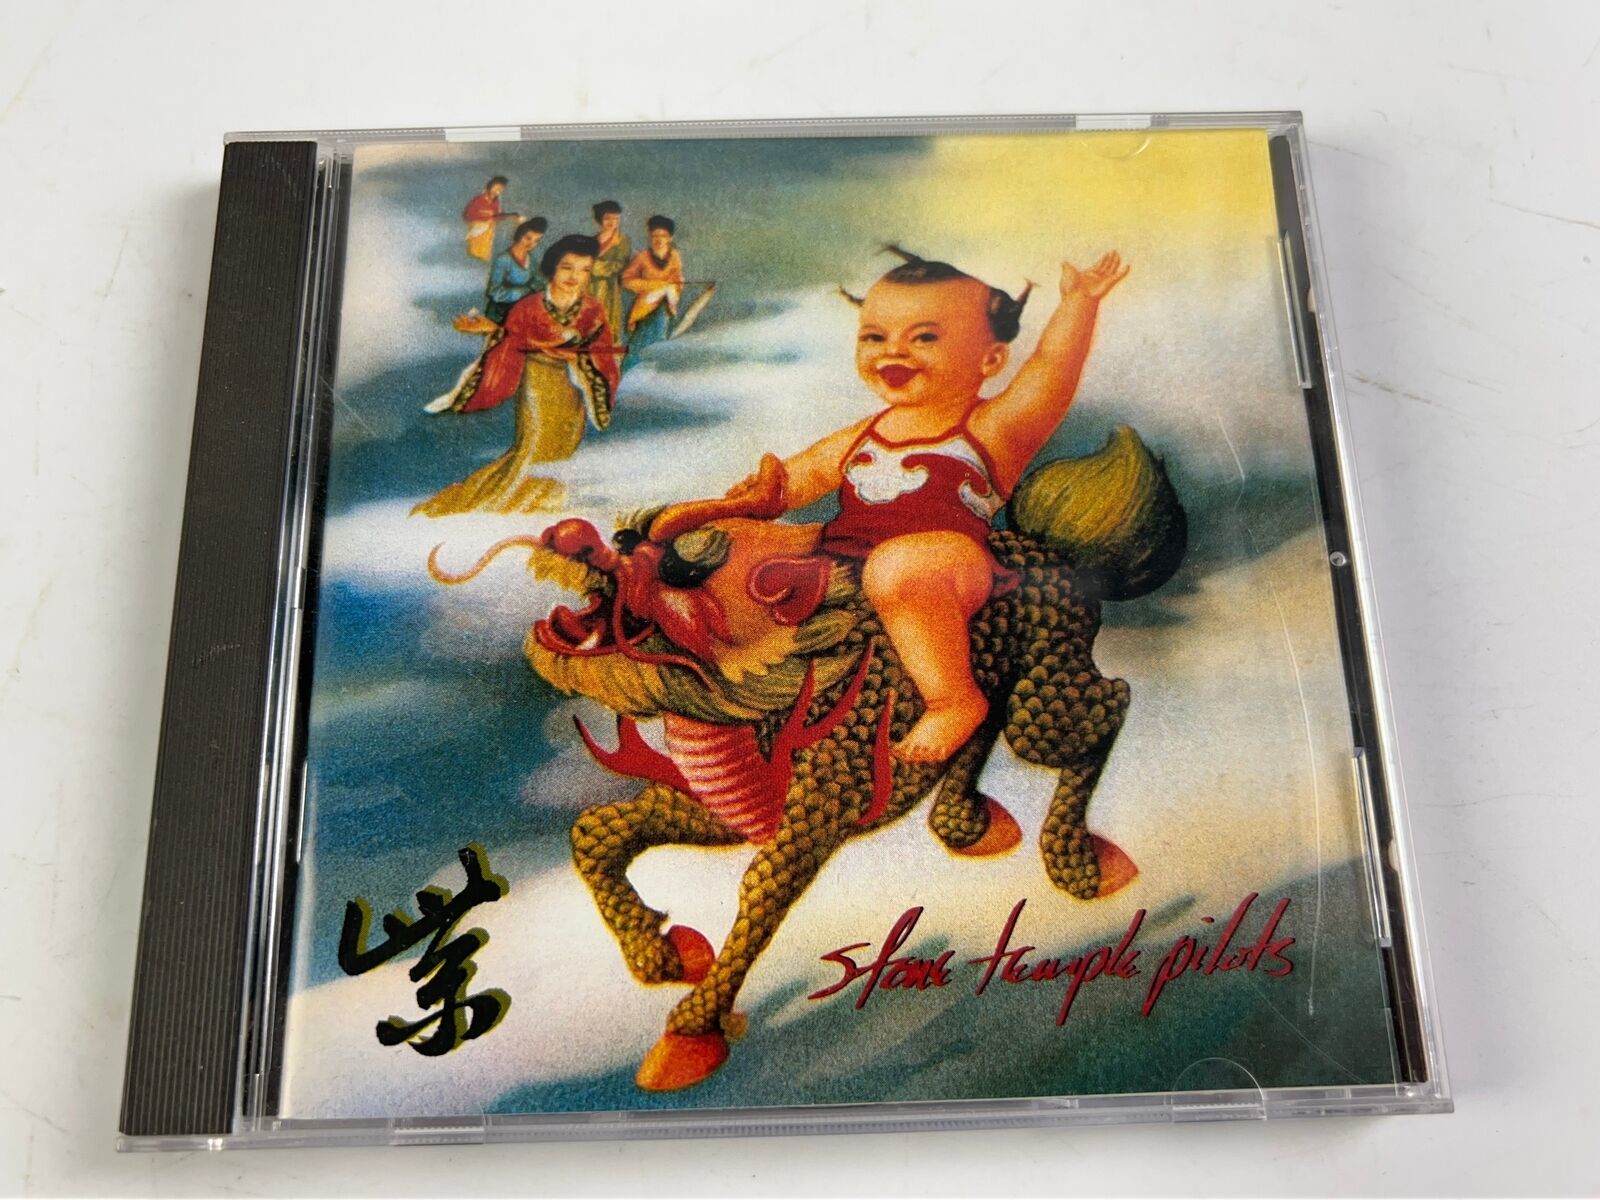 Primary image for Purple by Stone Temple Pilots (CD, 1994)